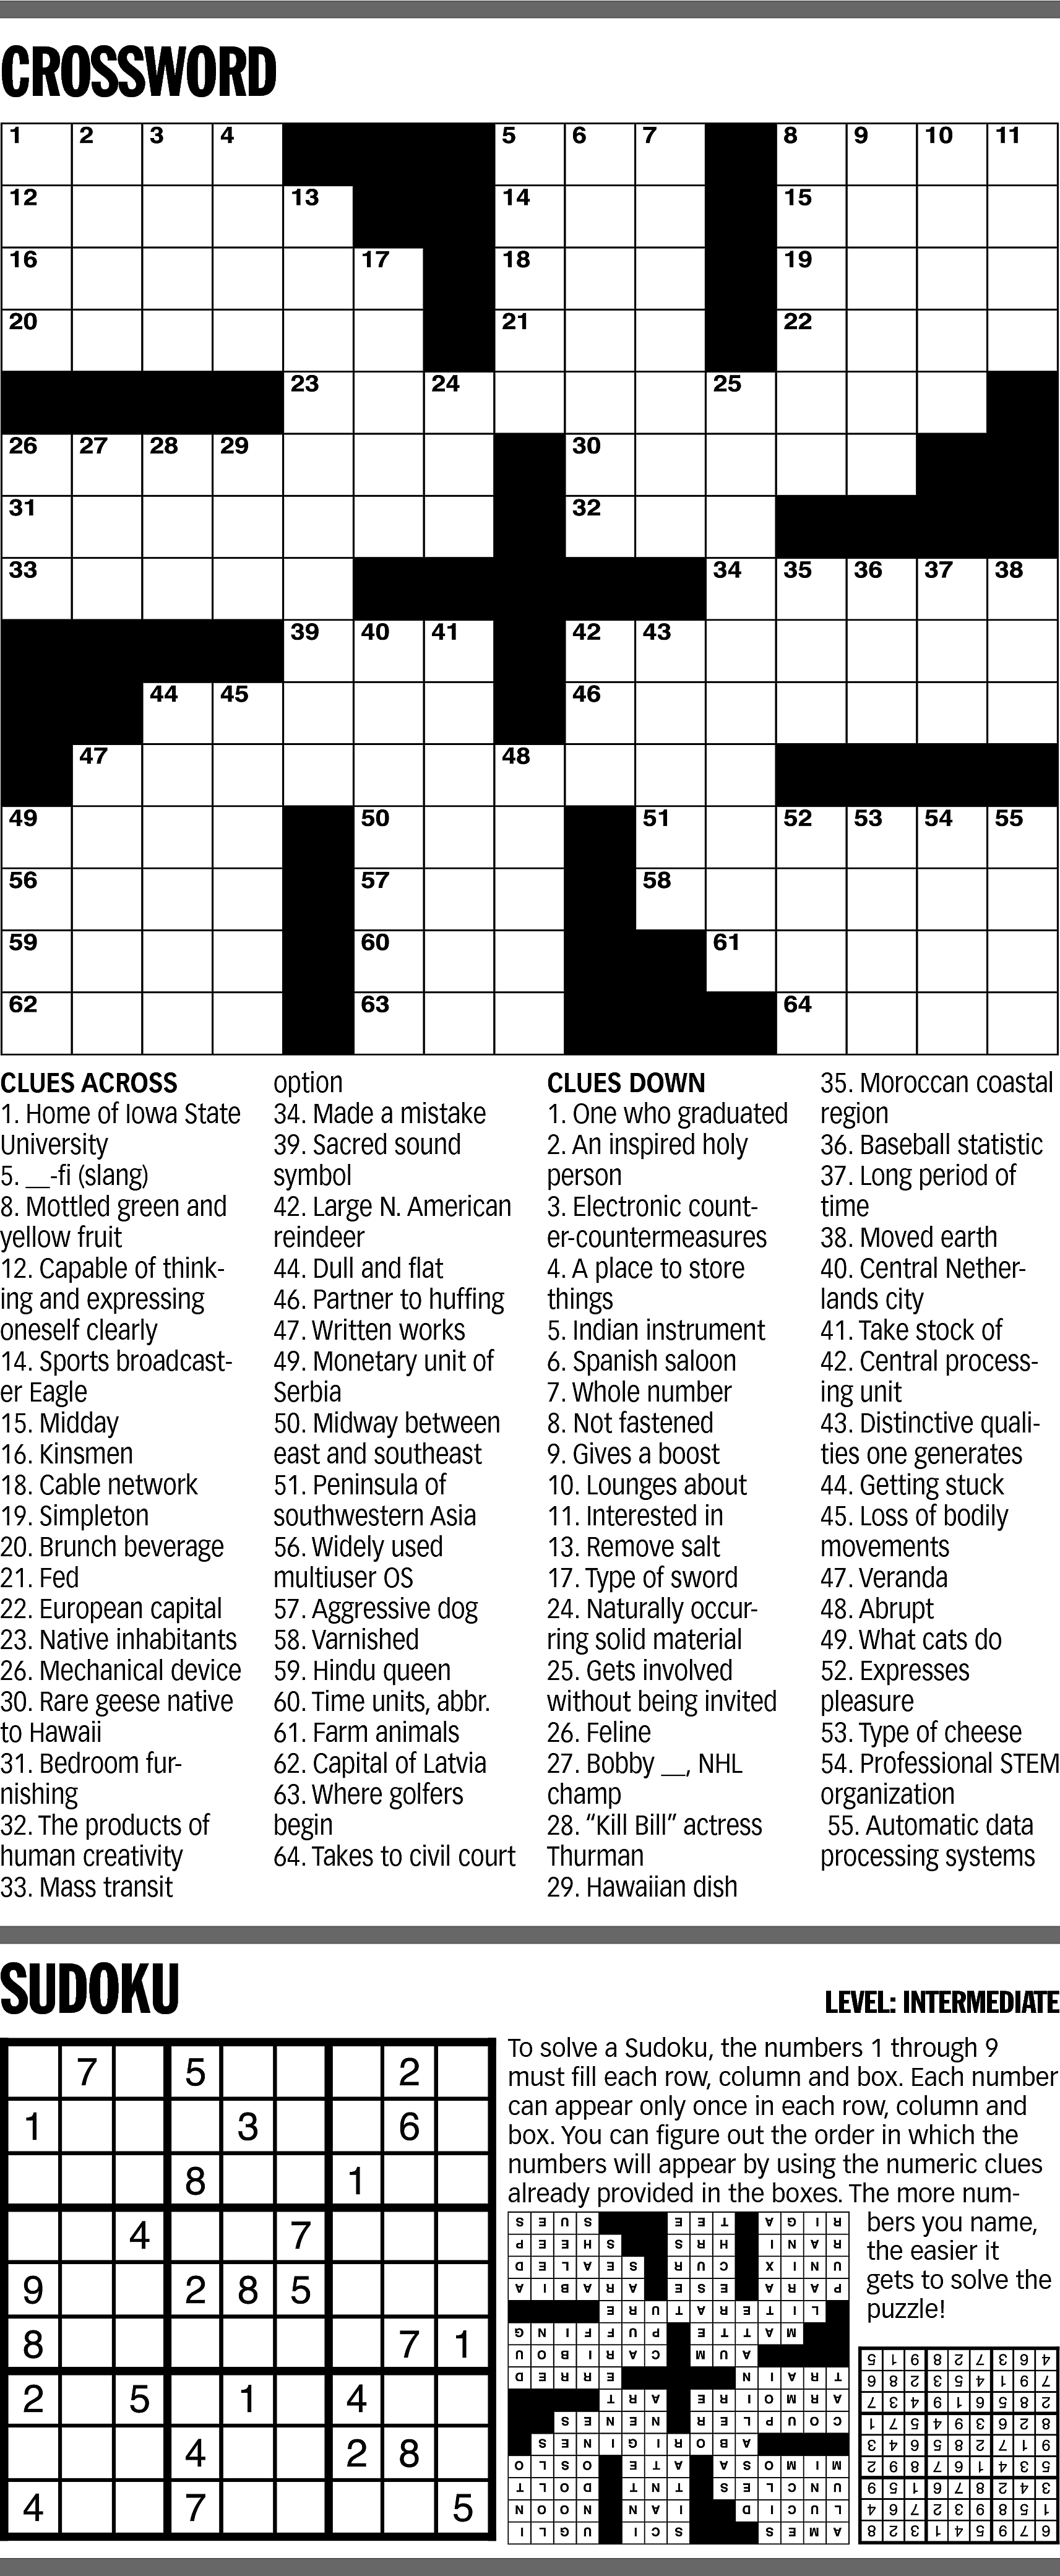 CROSSWORD <br> <br>CLUES ACROSS <br>1.  CROSSWORD    CLUES ACROSS  1. Home of Iowa State  University  5. __-fi (slang)  8. Mottled green and  yellow fruit  12. Capable of thinking and expressing  oneself clearly  14. Sports broadcaster Eagle  15. Midday  16. Kinsmen  18. Cable network  19. Simpleton  20. Brunch beverage  21. Fed  22. European capital  23. Native inhabitants  26. Mechanical device  30. Rare geese native  to Hawaii  31. Bedroom furnishing  32. The products of  human creativity  33. Mass transit    SUDOKU    option  34. Made a mistake  39. Sacred sound  symbol  42. Large N. American  reindeer  44. Dull and flat  46. Partner to huffing  47. Written works  49. Monetary unit of  Serbia  50. Midway between  east and southeast  51. Peninsula of  southwestern Asia  56. Widely used  multiuser OS  57. Aggressive dog  58. Varnished  59. Hindu queen  60. Time units, abbr.  61. Farm animals  62. Capital of Latvia  63. Where golfers  begin  64. Takes to civil court    CLUES DOWN  1. One who graduated  2. An inspired holy  person  3. Electronic counter-countermeasures  4. A place to store  things  5. Indian instrument  6. Spanish saloon  7. Whole number  8. Not fastened  9. Gives a boost  10. Lounges about  11. Interested in  13. Remove salt  17. Type of sword  24. Naturally occurring solid material  25. Gets involved  without being invited  26. Feline  27. Bobby __, NHL  champ  28. “Kill Bill” actress  Thurman  29. Hawaiian dish    35. Moroccan coastal  region  36. Baseball statistic  37. Long period of  time  38. Moved earth  40. Central Netherlands city  41. Take stock of  42. Central processing unit  43. Distinctive qualities one generates  44. Getting stuck  45. Loss of bodily  movements  47. Veranda  48. Abrupt  49. What cats do  52. Expresses  pleasure  53. Type of cheese  54. Professional STEM  organization  55. Automatic data  processing systems    LEVEL: INTERMEDIATE  To solve a Sudoku, the numbers 1 through 9  must fill each row, column and box. Each number  can appear only once in each row, column and  box. You can figure out the order in which the  numbers will appear by using the numeric clues  already provided in the boxes. The more numbers you name,  the easier it  gets to solve the  puzzle!    